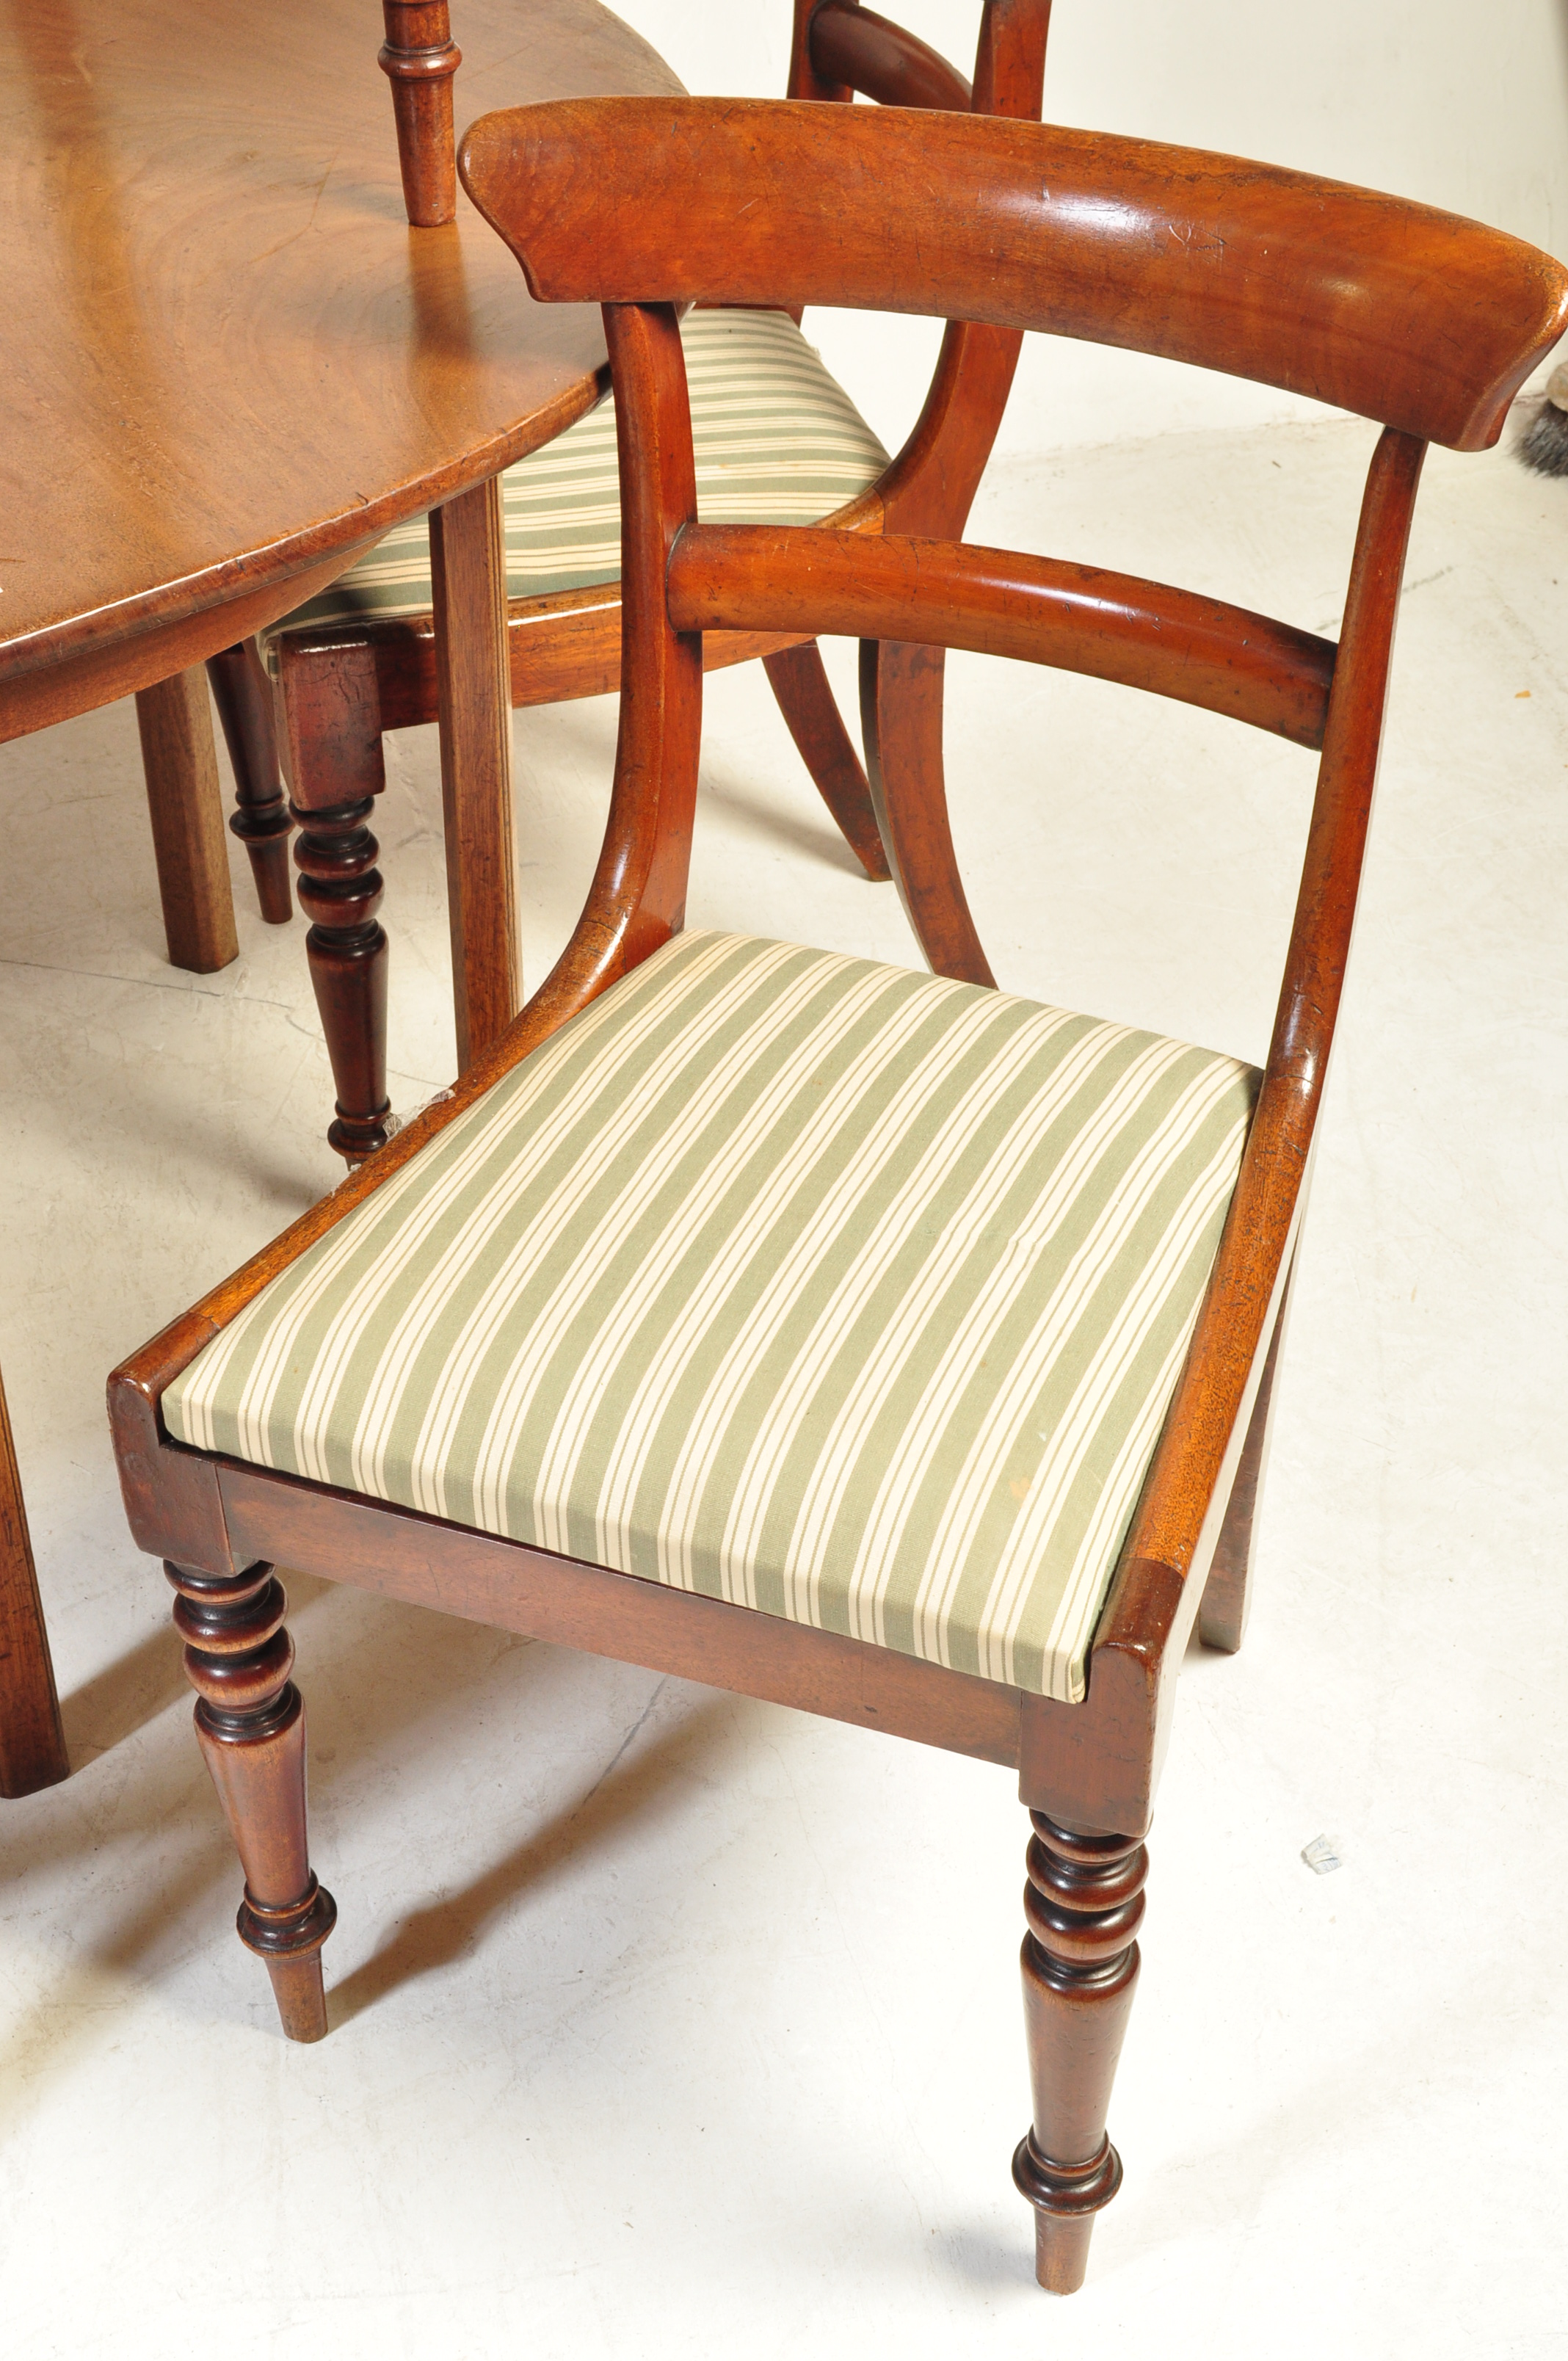 LONG RUN OF REGENCY CHAIRS AND D END TABLE WITH TWO LEAVES - Image 4 of 6